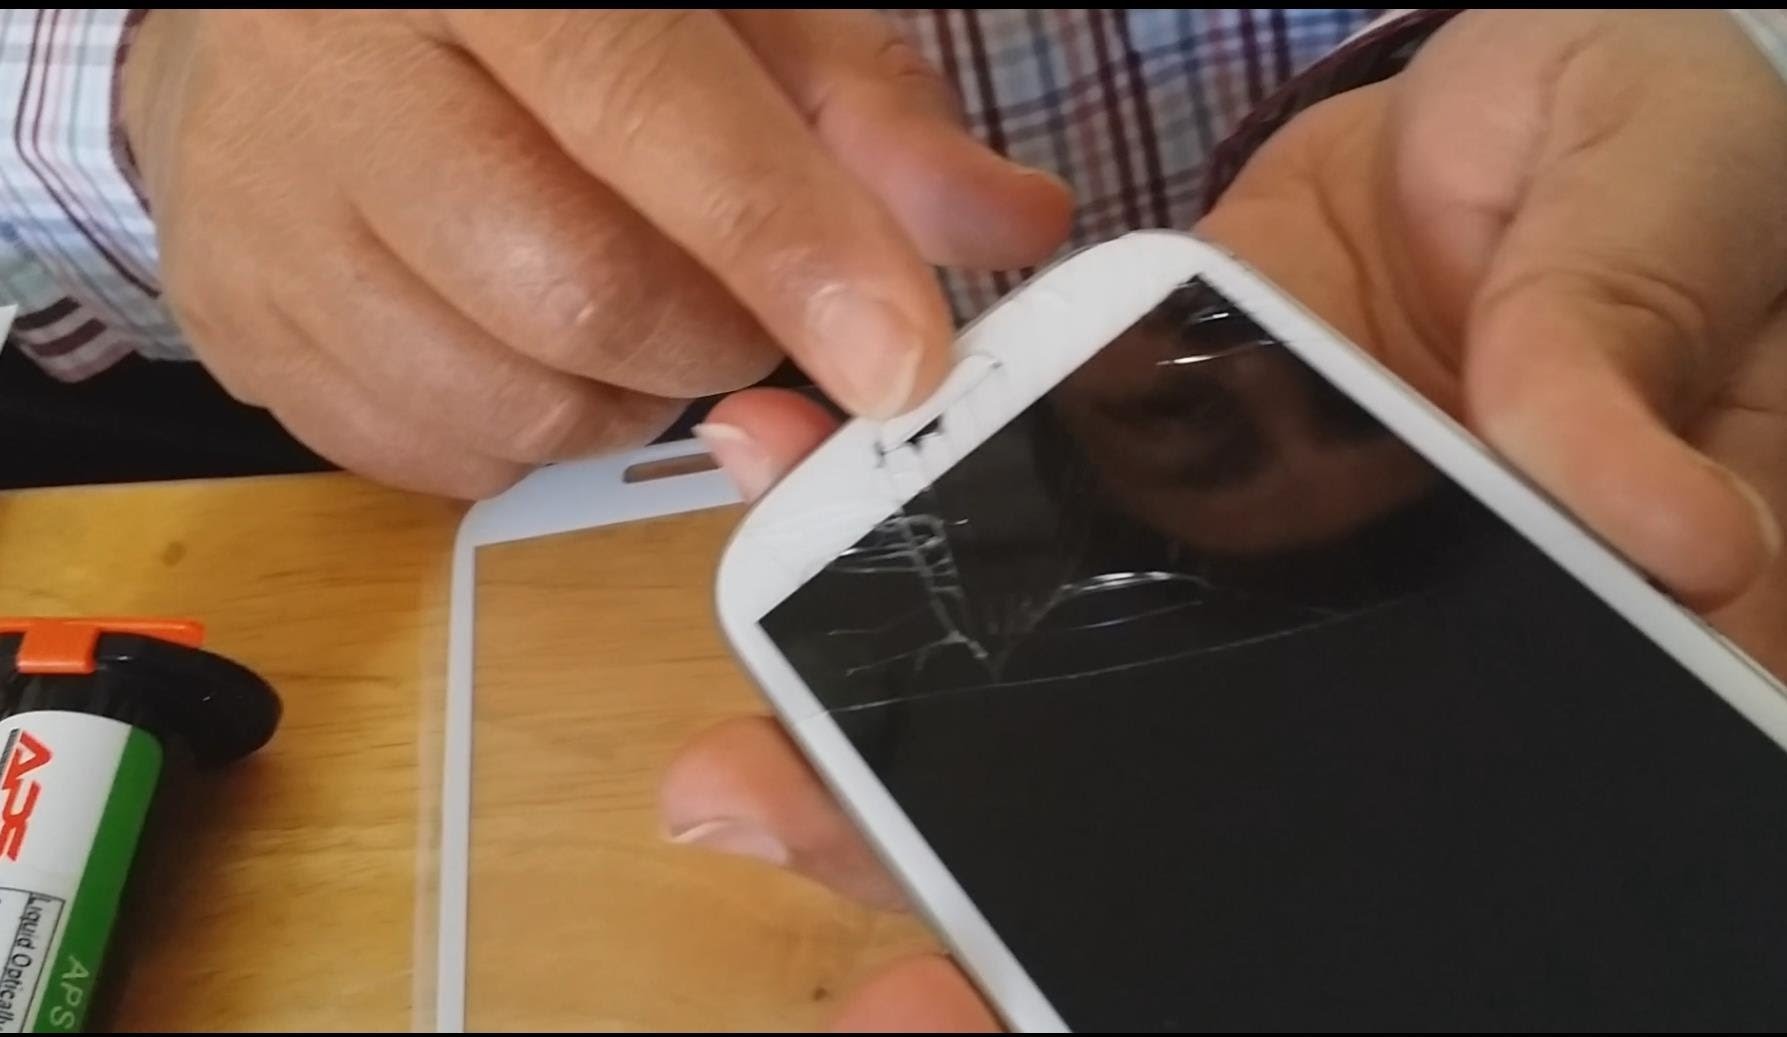 How to Repair Broken Front Glass Galaxy S3 yourself (DIY) in Easy Steps